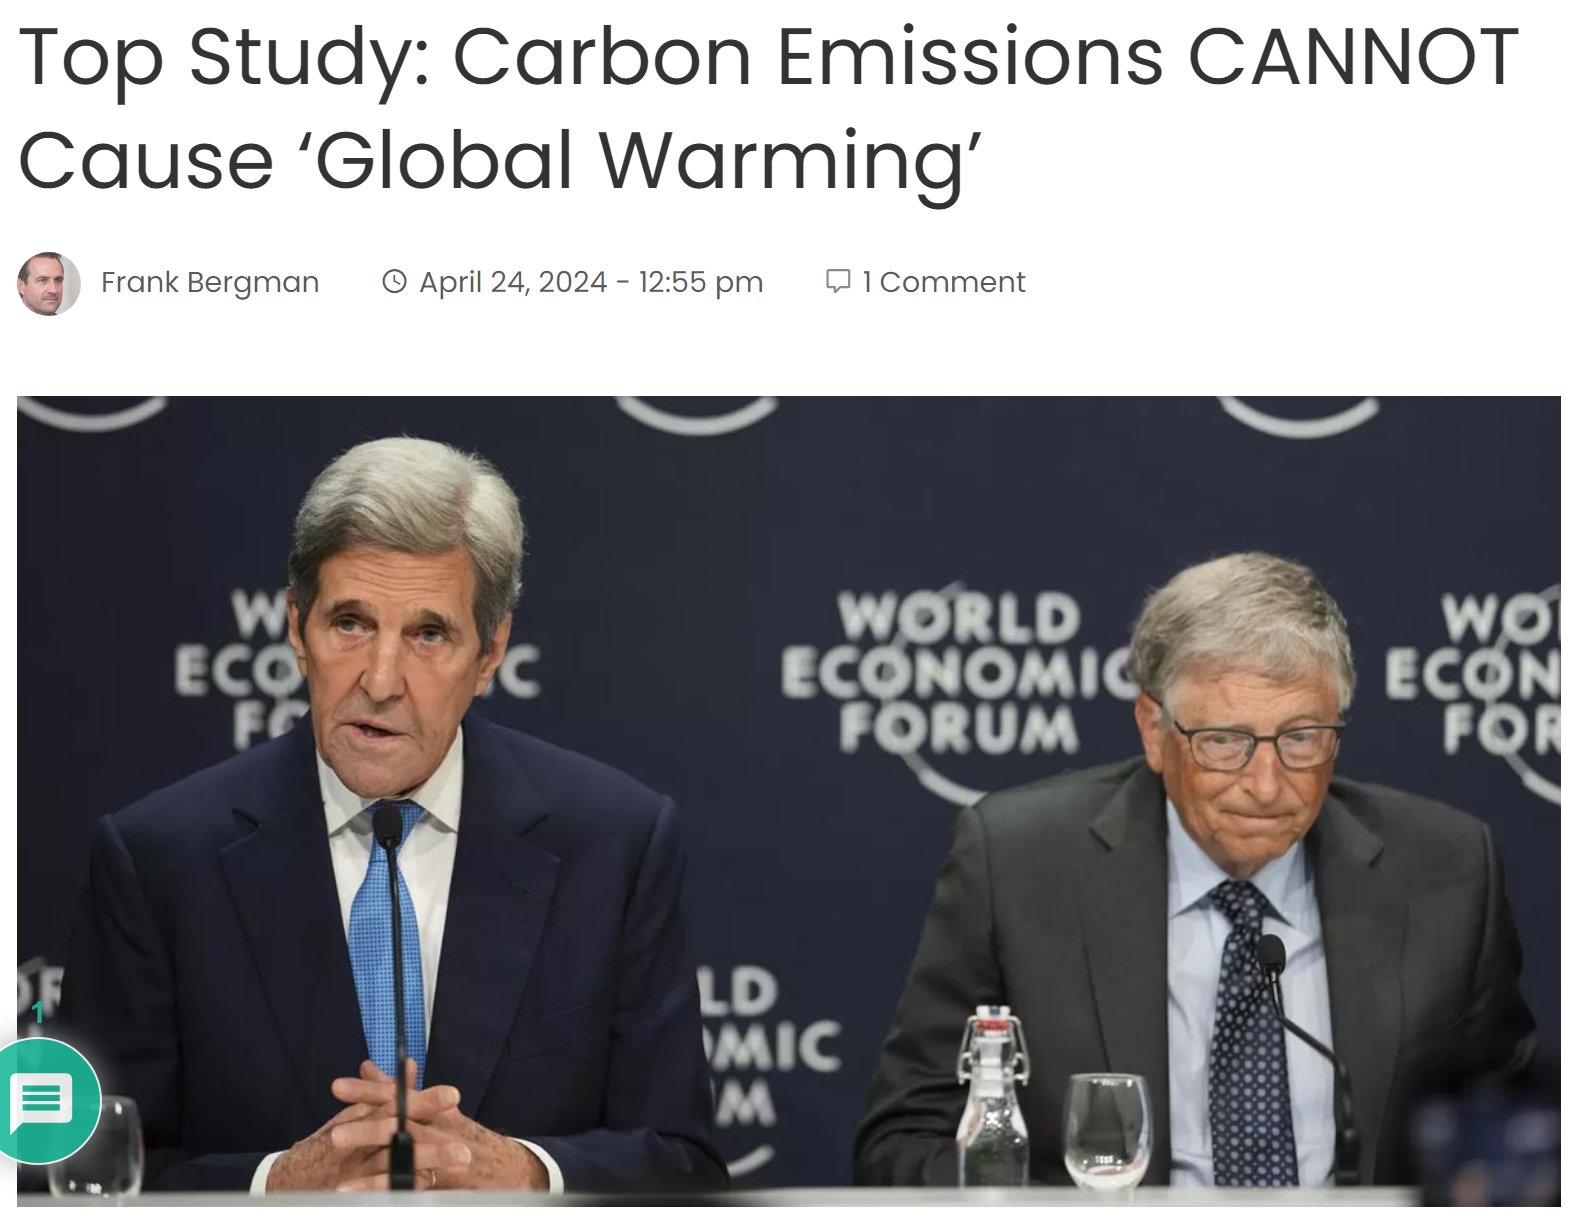 Carbon Emissions is NOT causing Global Warming